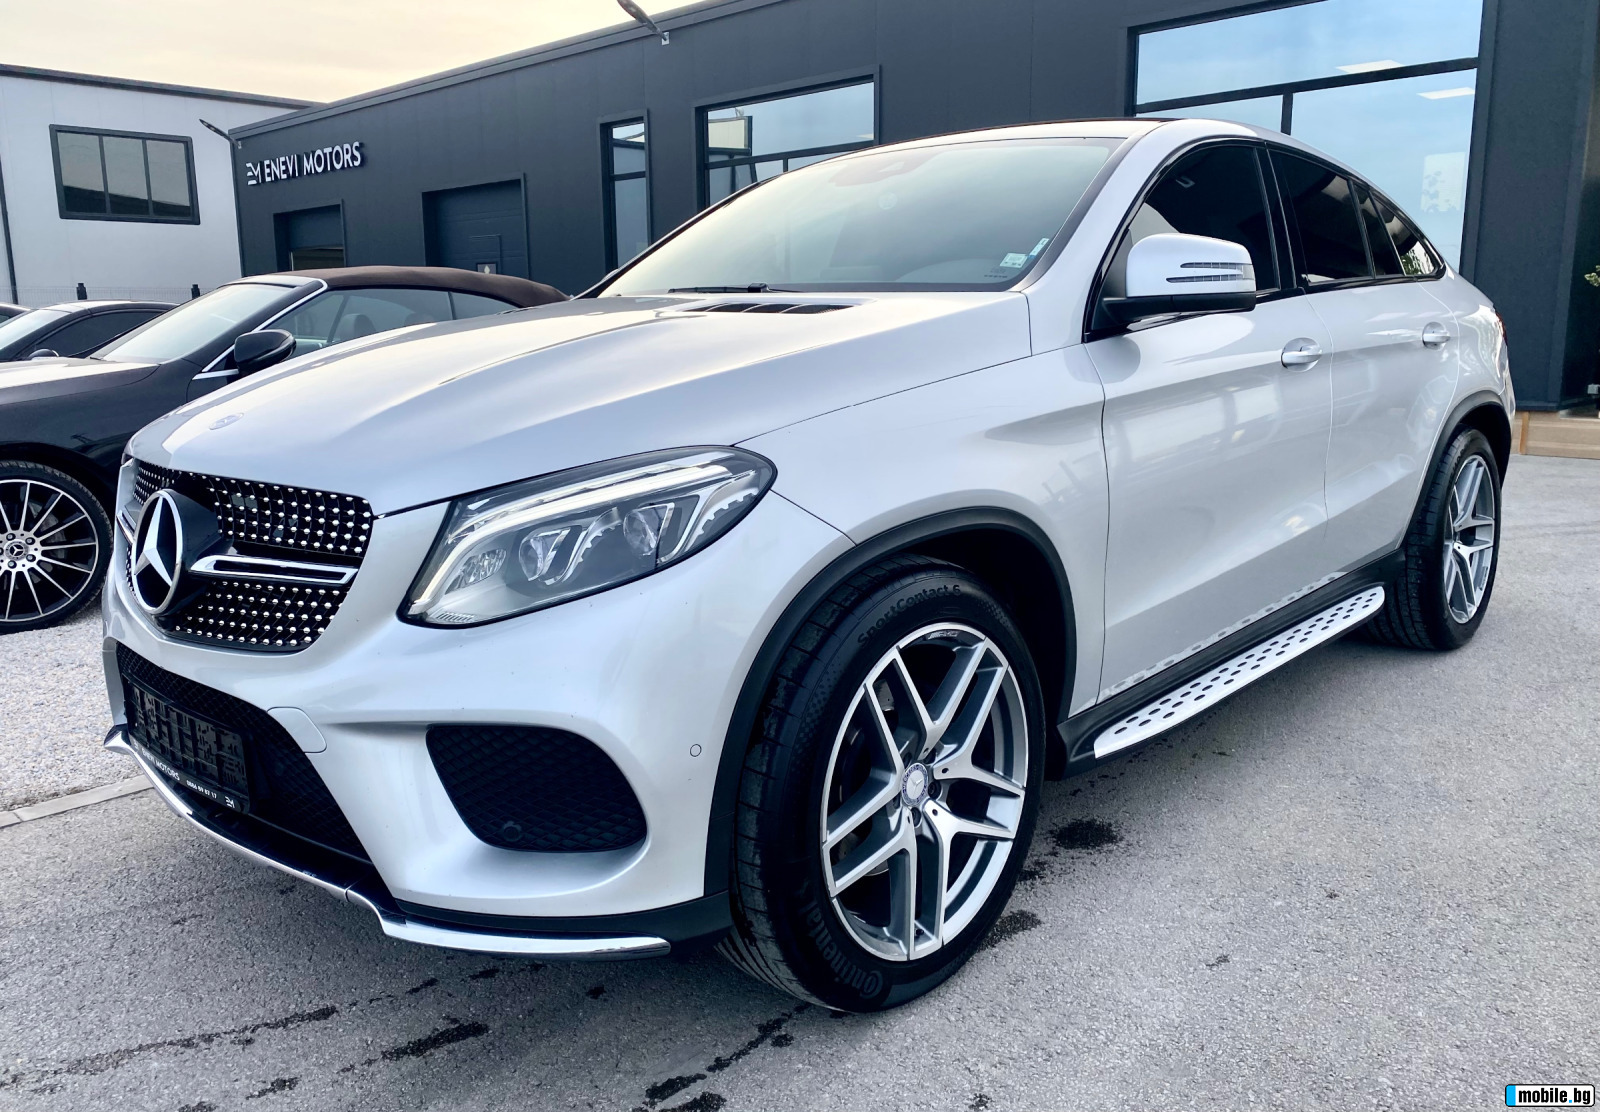 Mercedes-Benz GLE Coupe 350D AMG | Mobile.bg   3